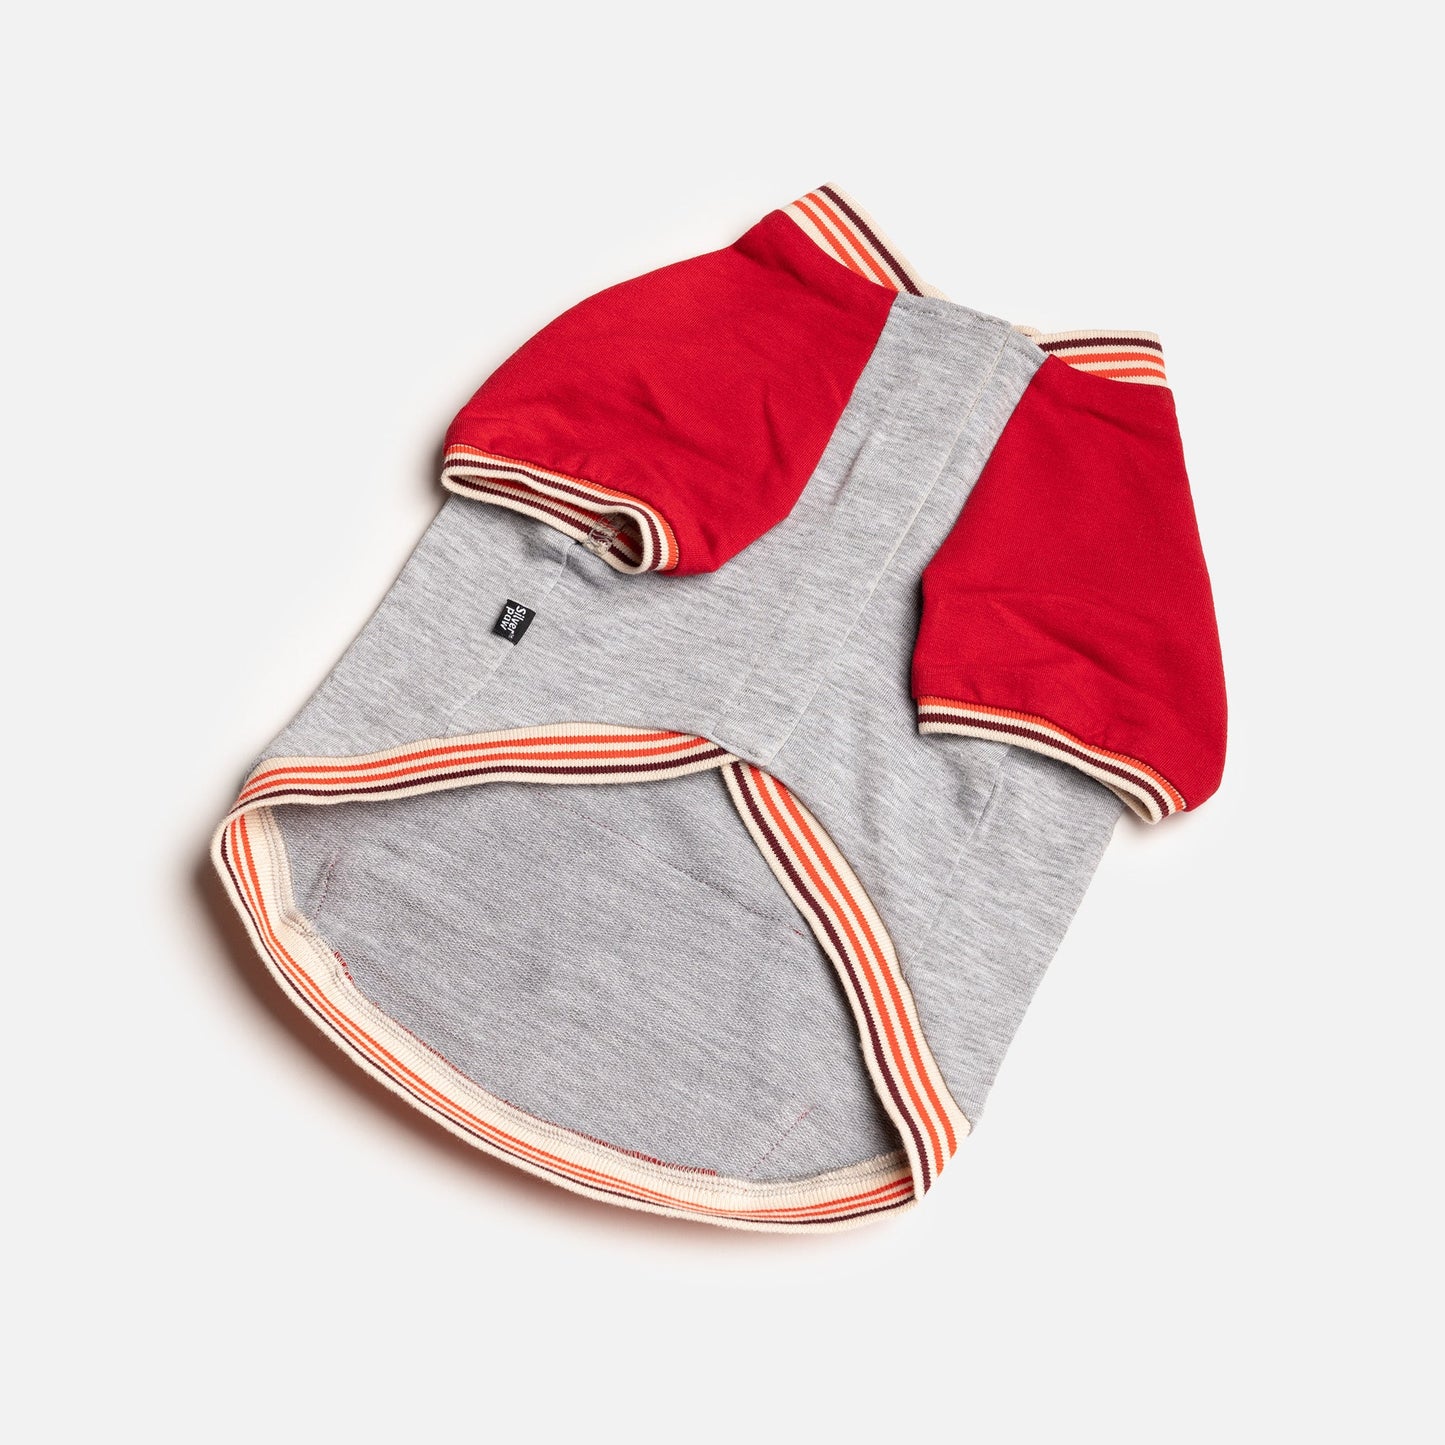 Chase Dog Sweatshirt - Red - Silver Paw